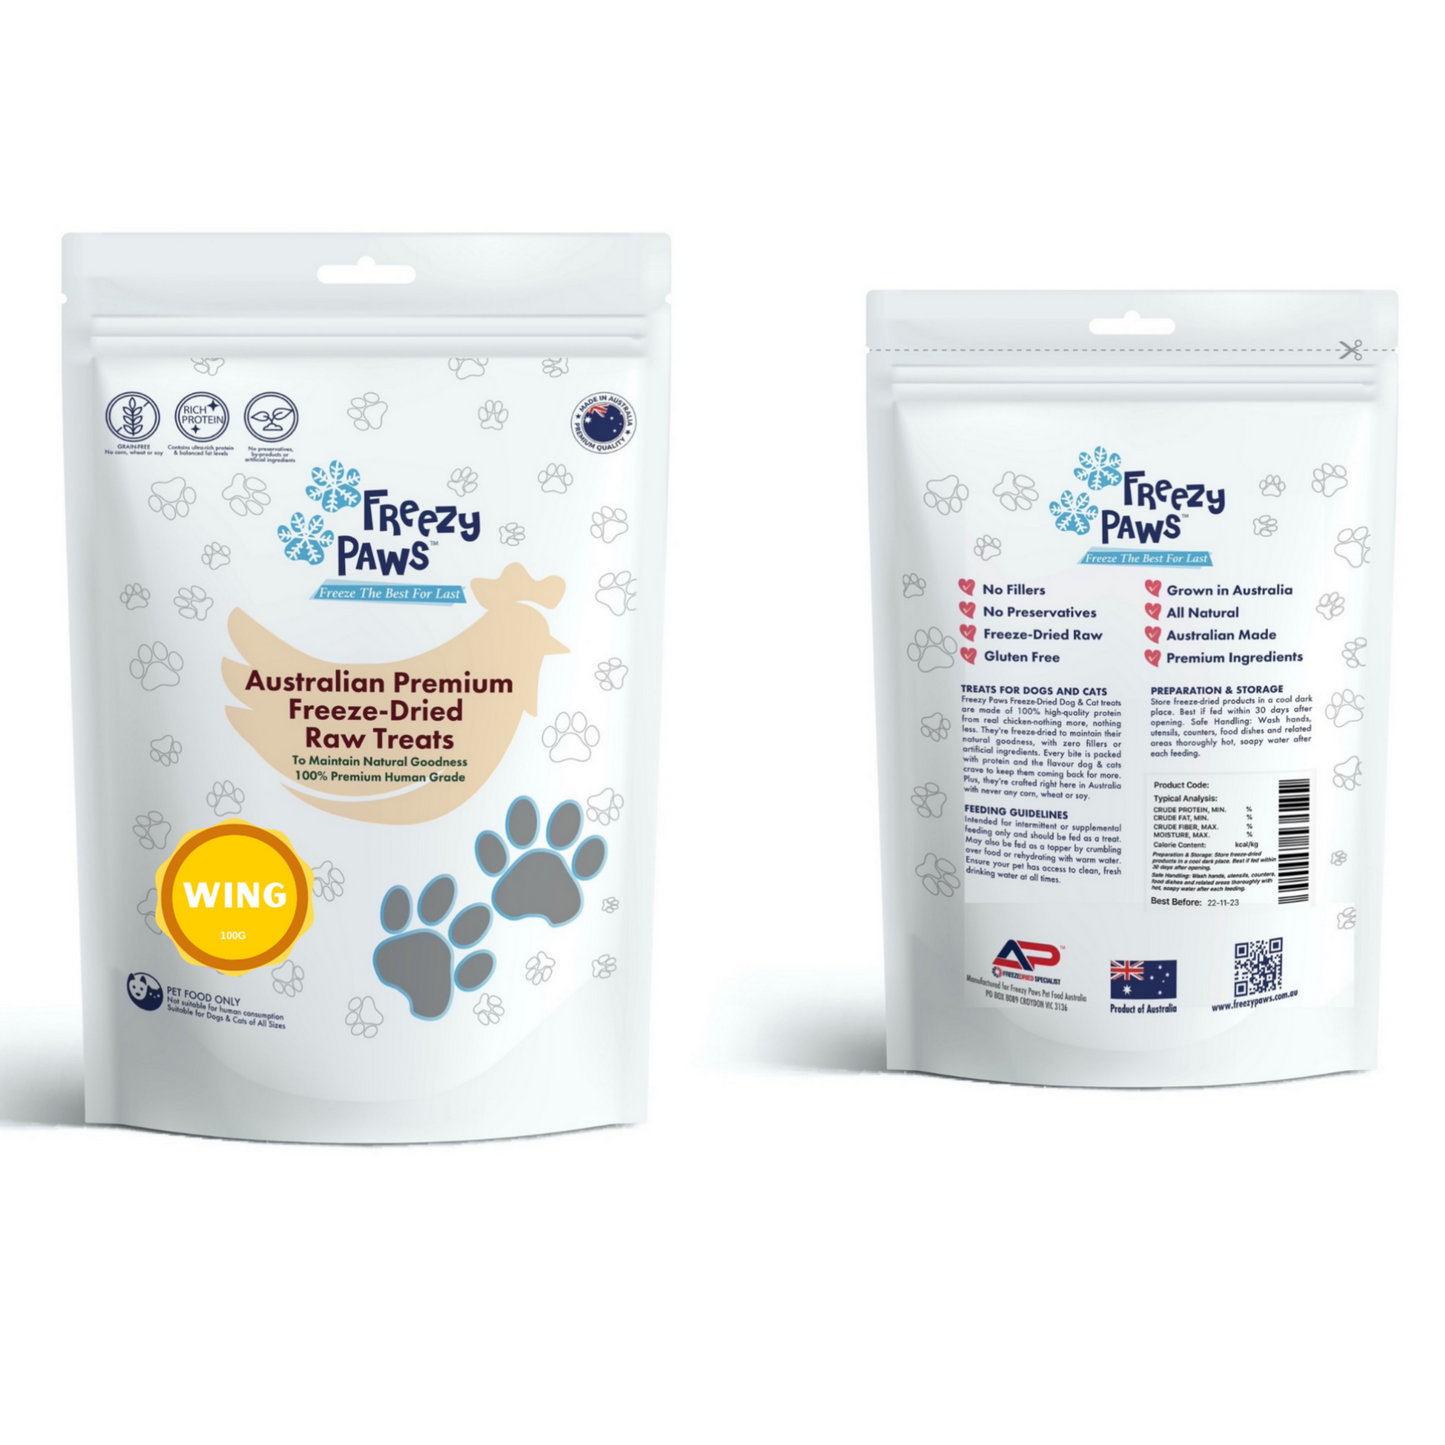 Freezy Paws Freeze-Dried Chicken Wing Raw Treats for Pet Cat Dog 100g